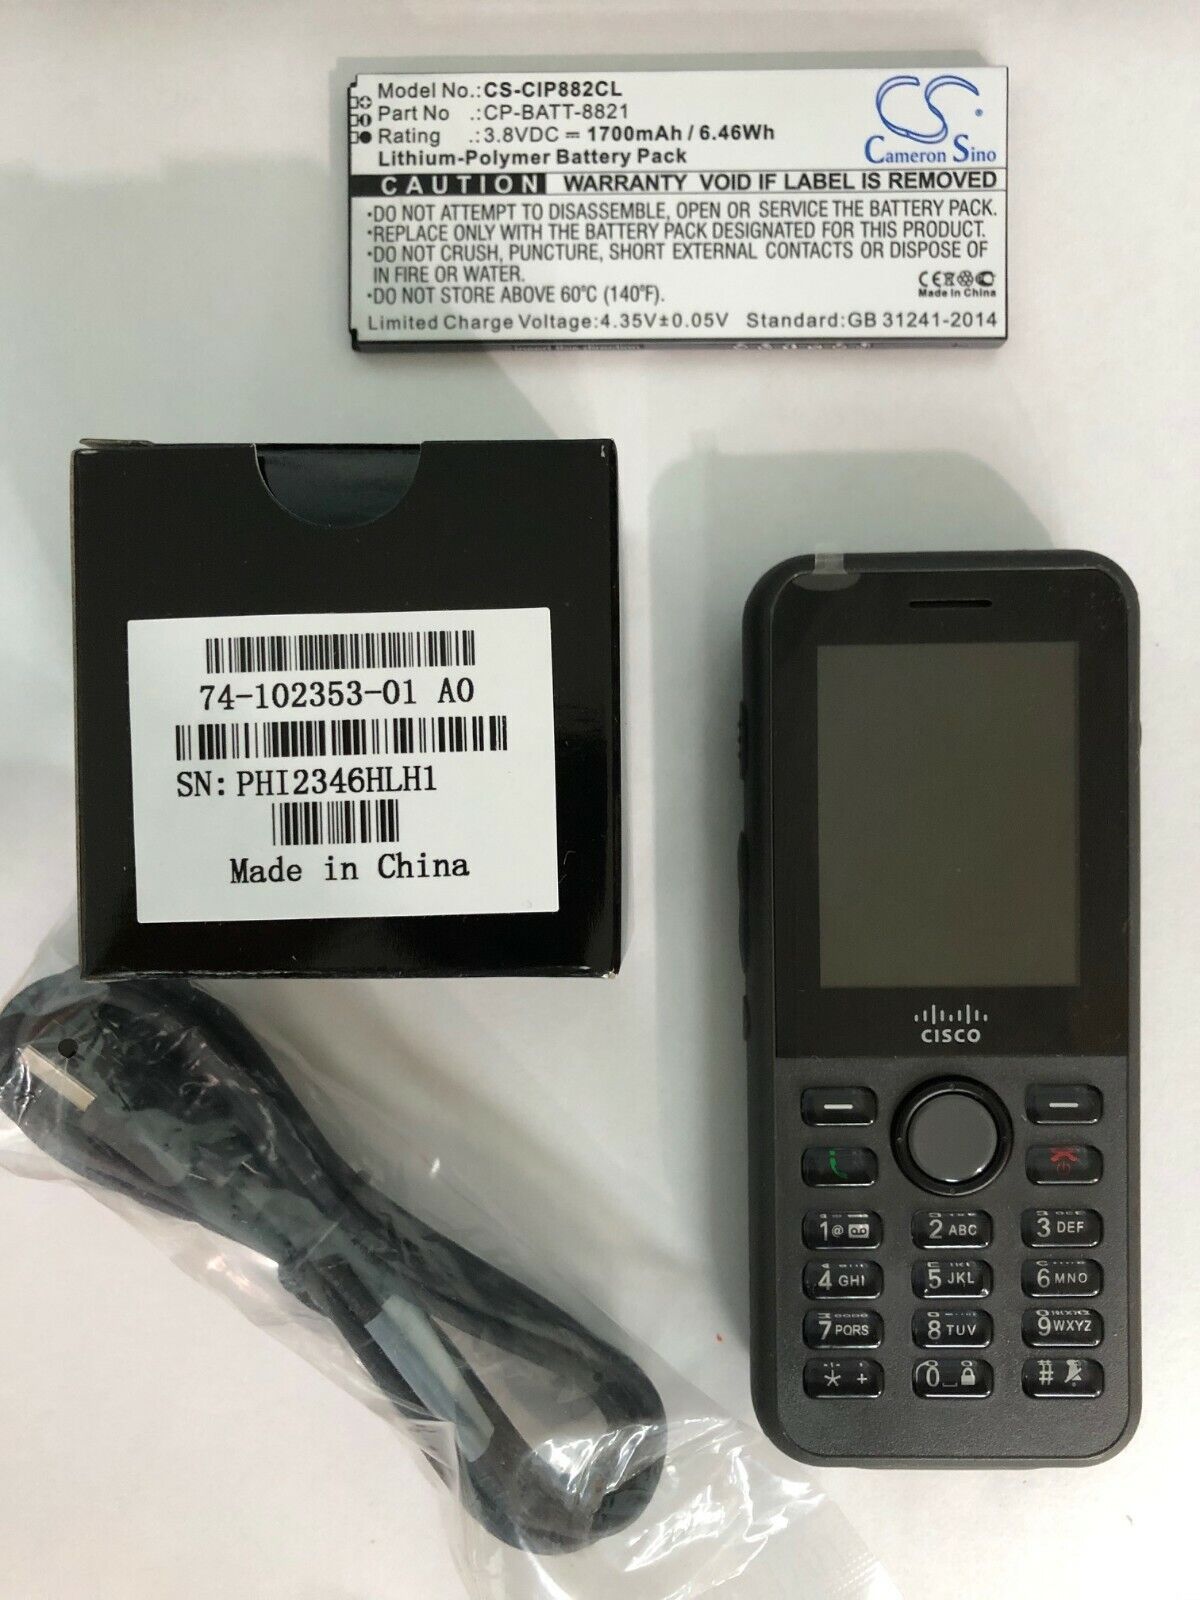 CISCO CP-8821-K9-BUN WIRELESS PHONE with NEW Battery and NEW USB Charger BUNDLE